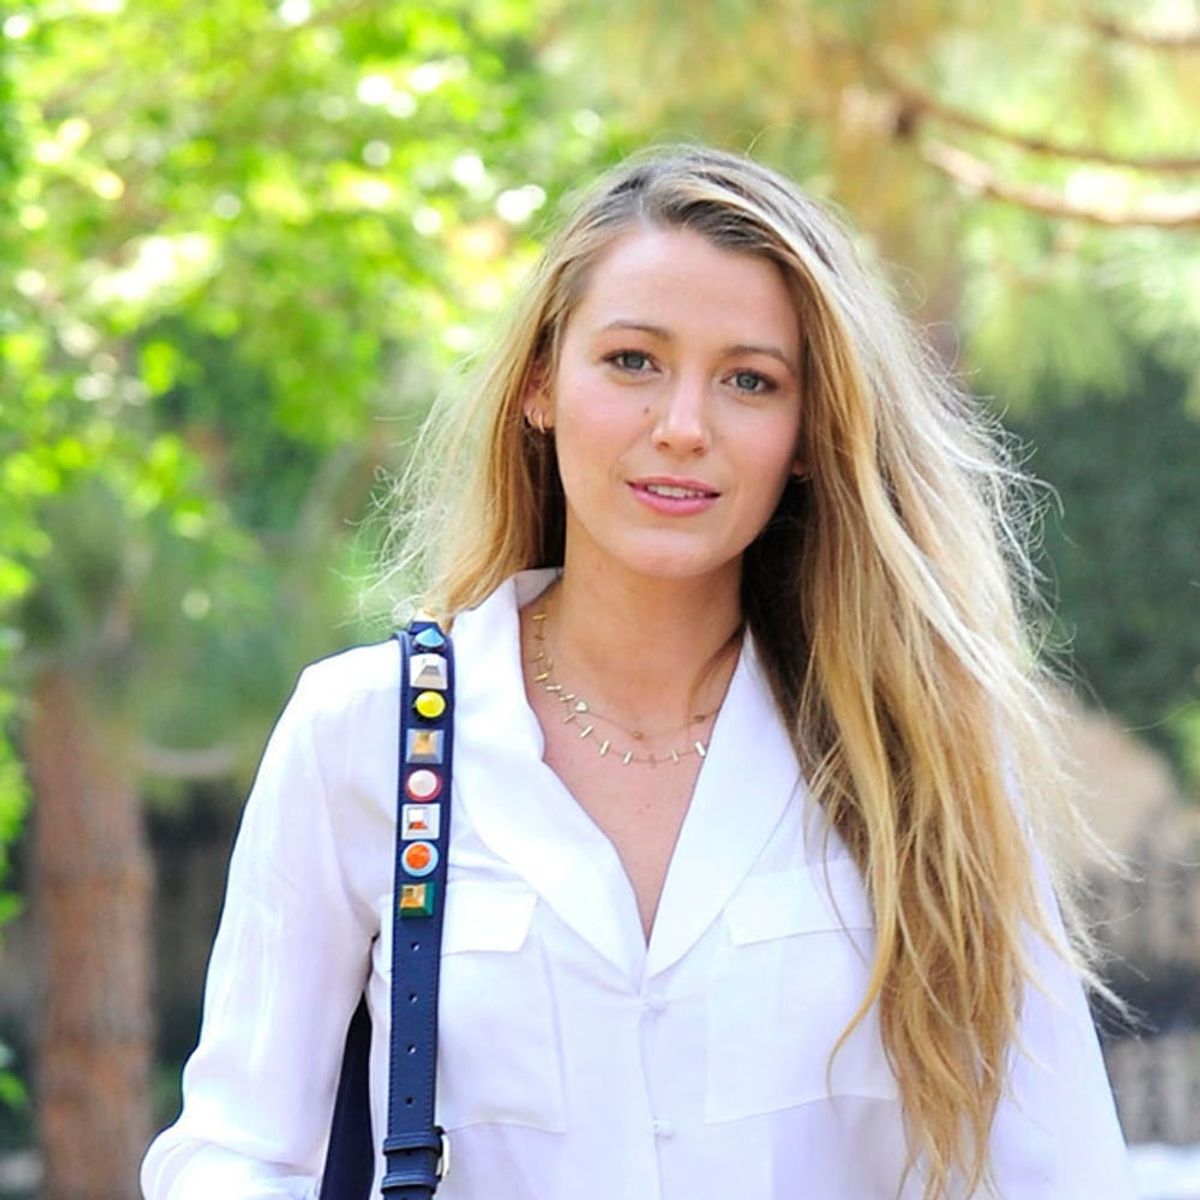 You Can Buy Blake Lively’s Jeans for Under $50